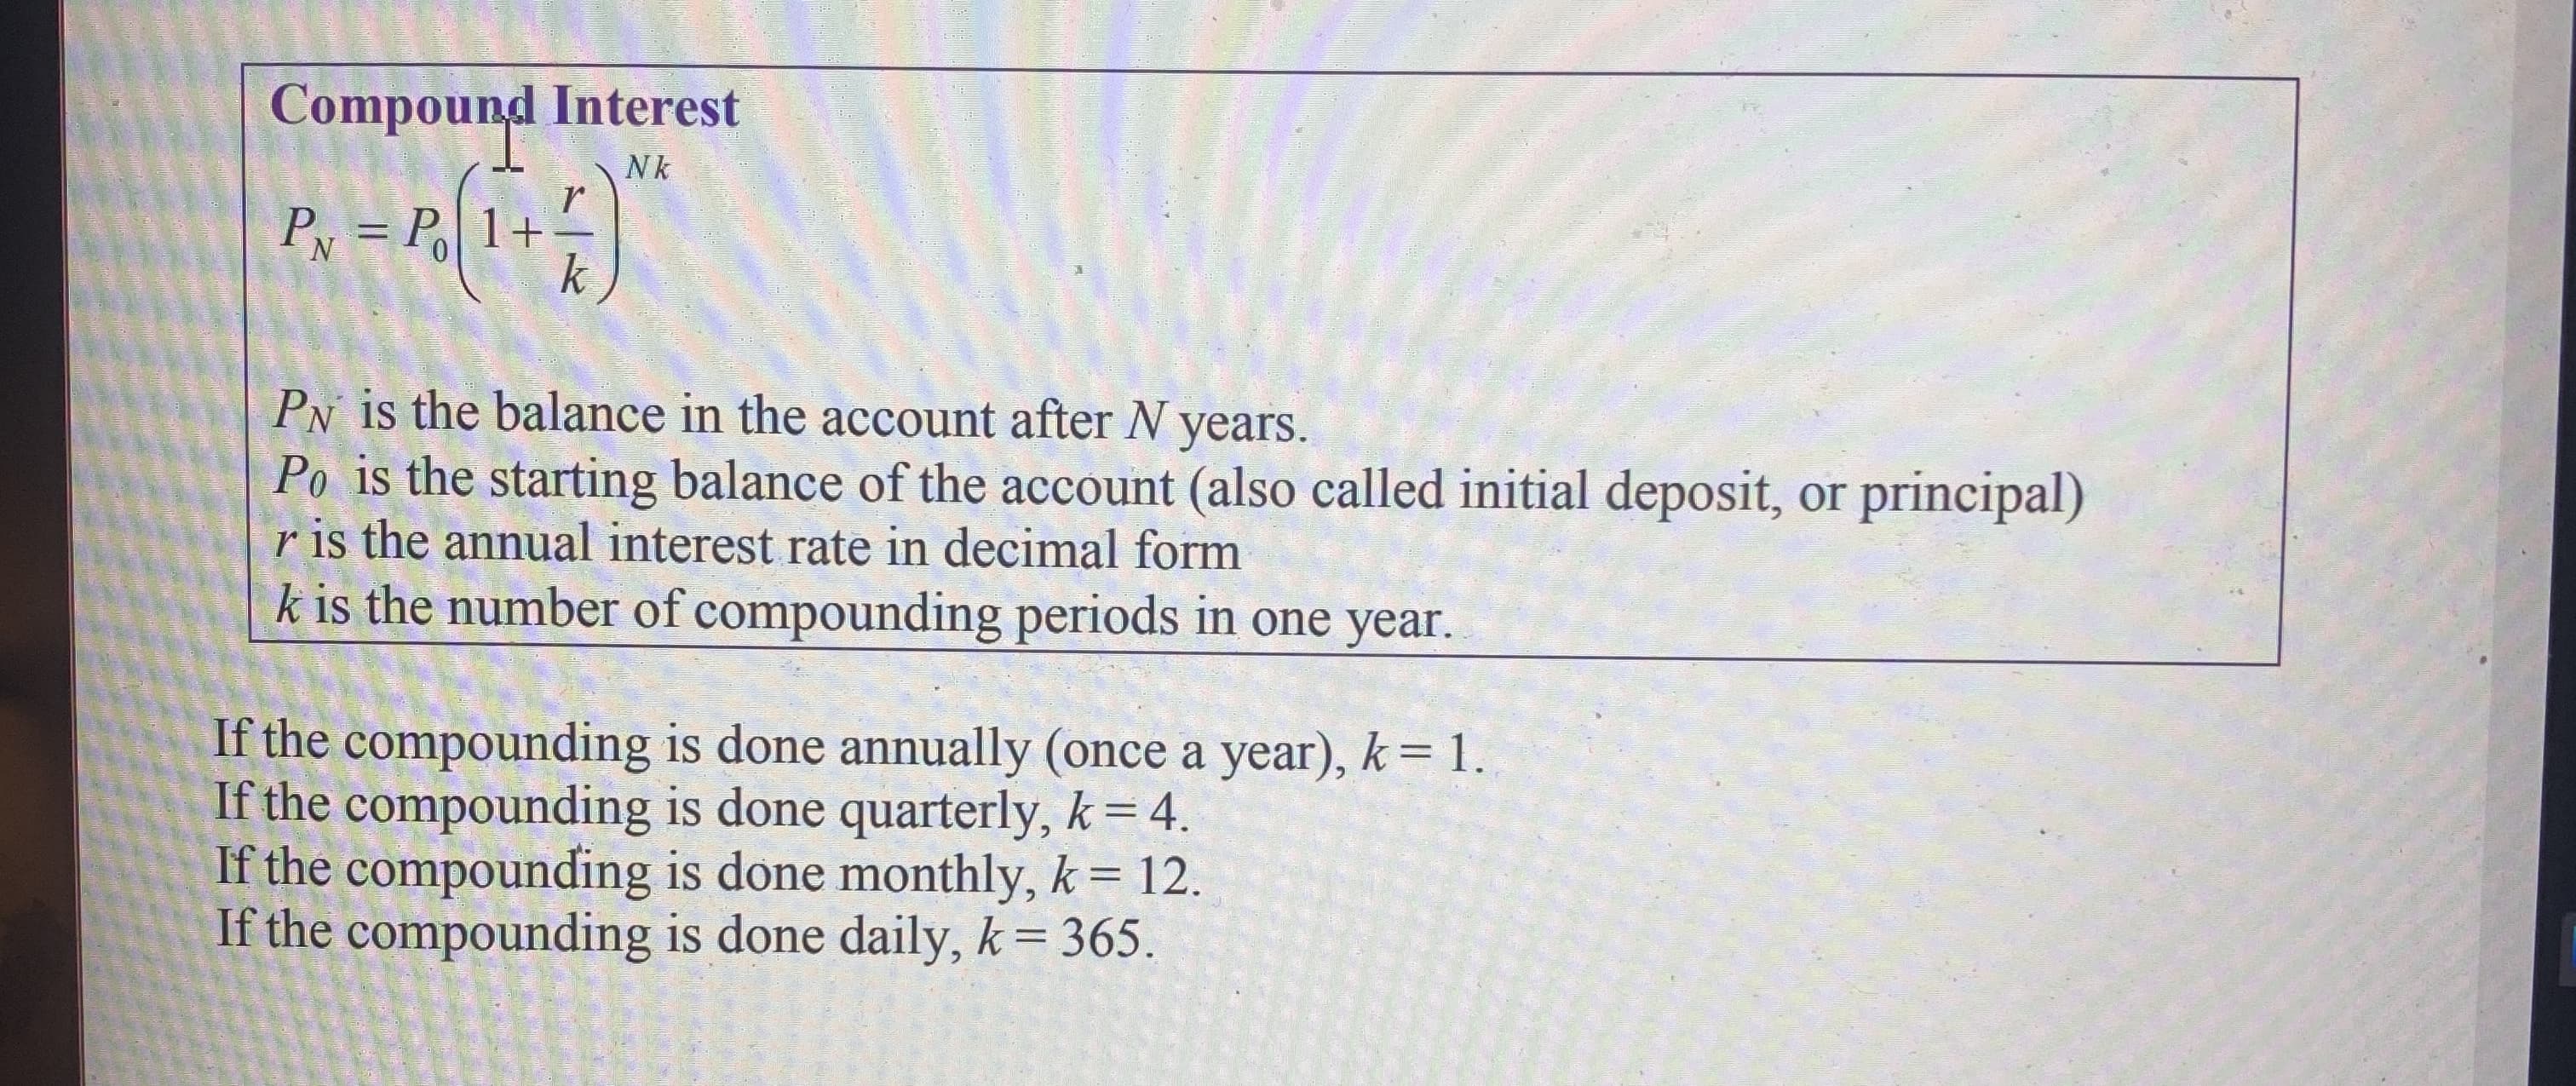 Compound Interest
Nk
PN = P 1+
Py is the balance in the account after N years.
Po is the starting balance of the account (also called initial deposit, or principal)
r is the annual interest rate in decimal form
k is the number of compounding periods in one year.
If the compounding is done annually (once a year), k= 1.
If the compounding is done quarterly, k = 4.
If the compounding is done monthly, k = 12.
If the compounding is done daily, k= 365.
%3D
